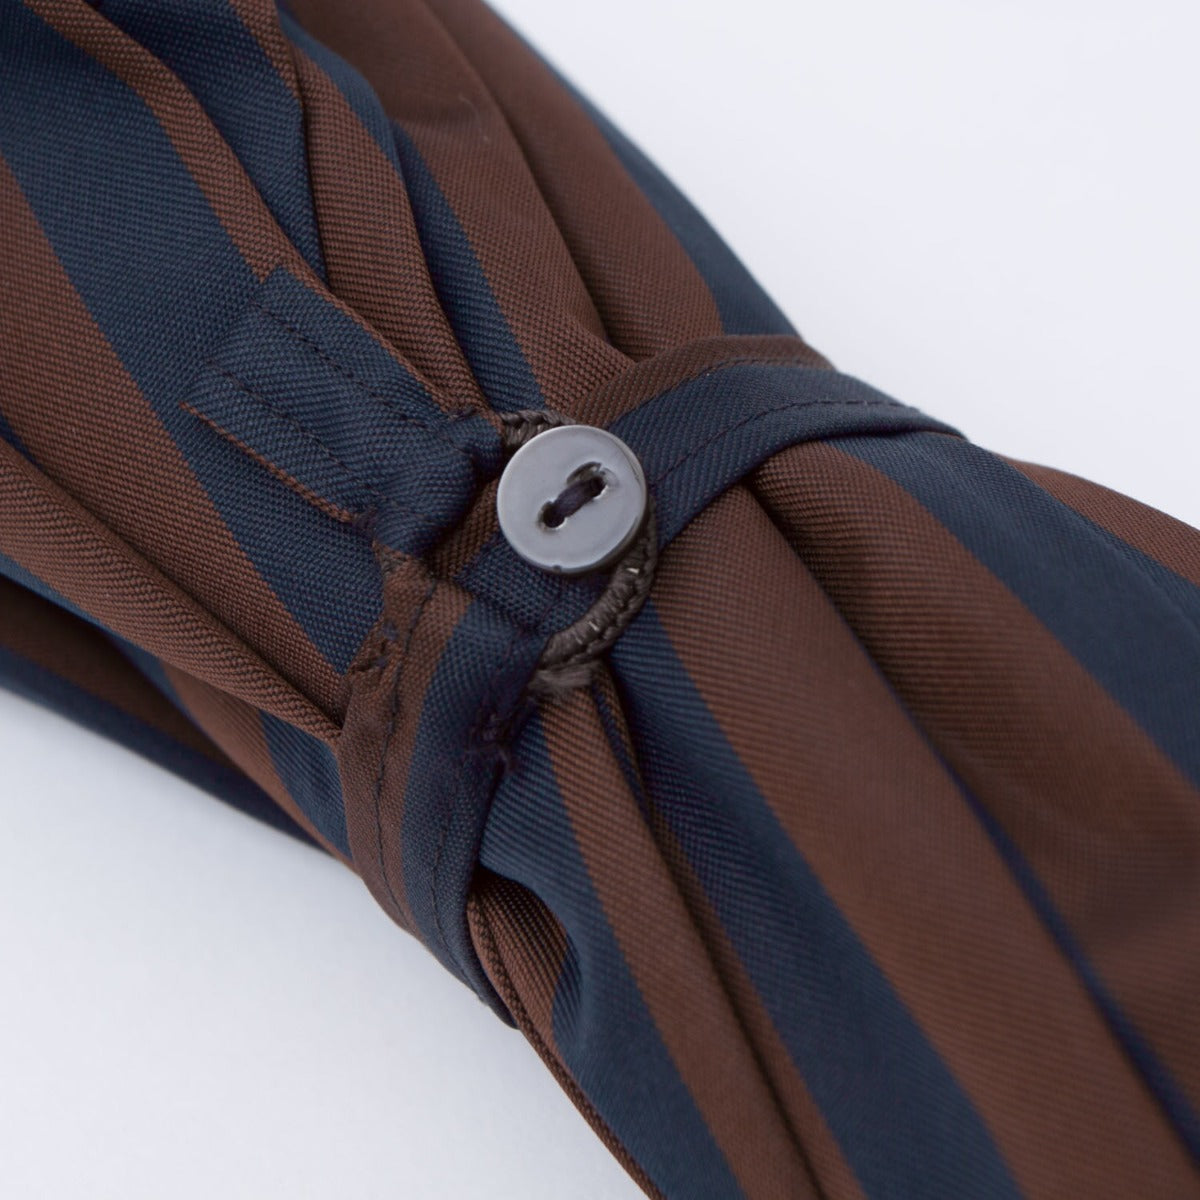 A Navy and Brown Stripe Travel Umbrella with Leather Handle from KirbyAllison.com with a button.